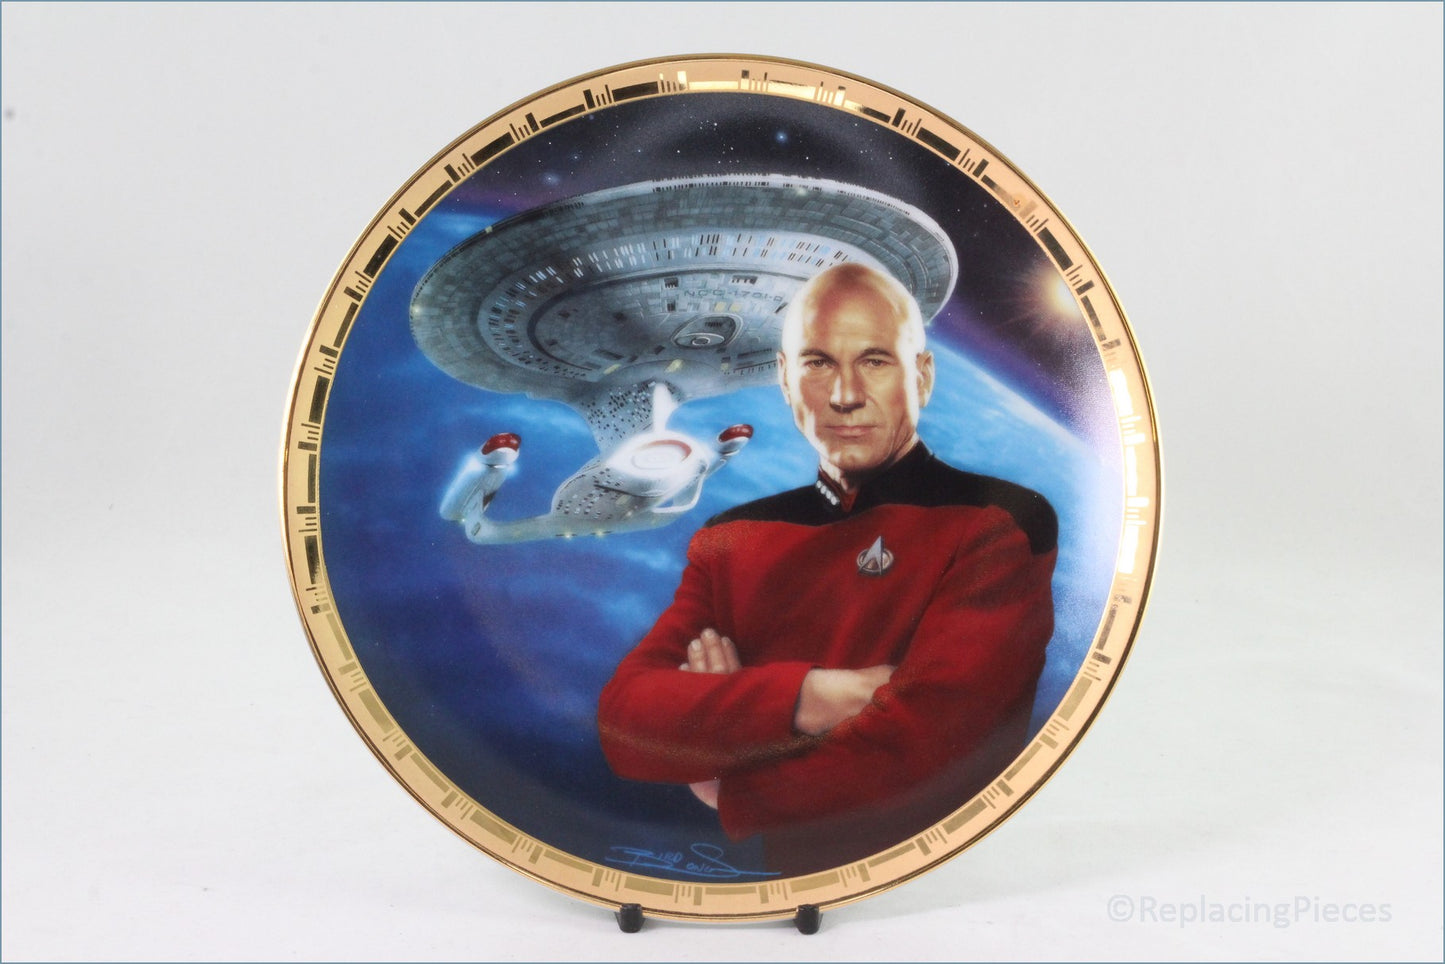 The Hamilton Collection - Star Trek 'The Next Generation' - The Power Of Command - Captain Picard And The USS Enterprise NCC-1710-D